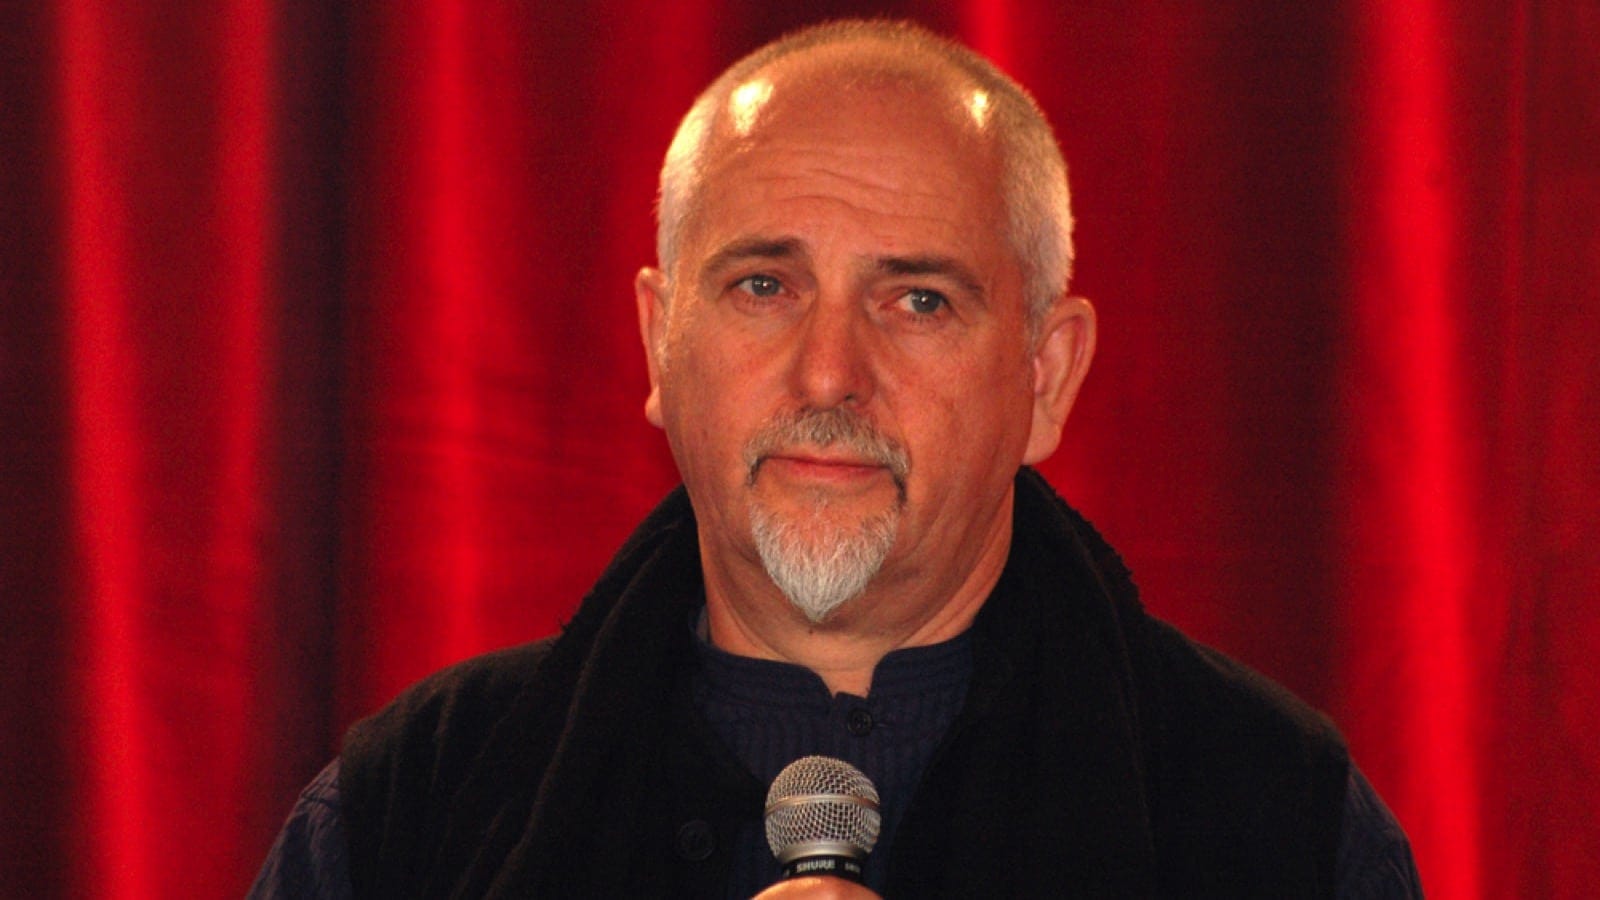 NOVEMBER 30, 2005 - BERLIN: British musician Peter Gabriel (formerly singer of the band Genesis) at the presentation of the cultural program for the upcoming soccer world championship in Germany.